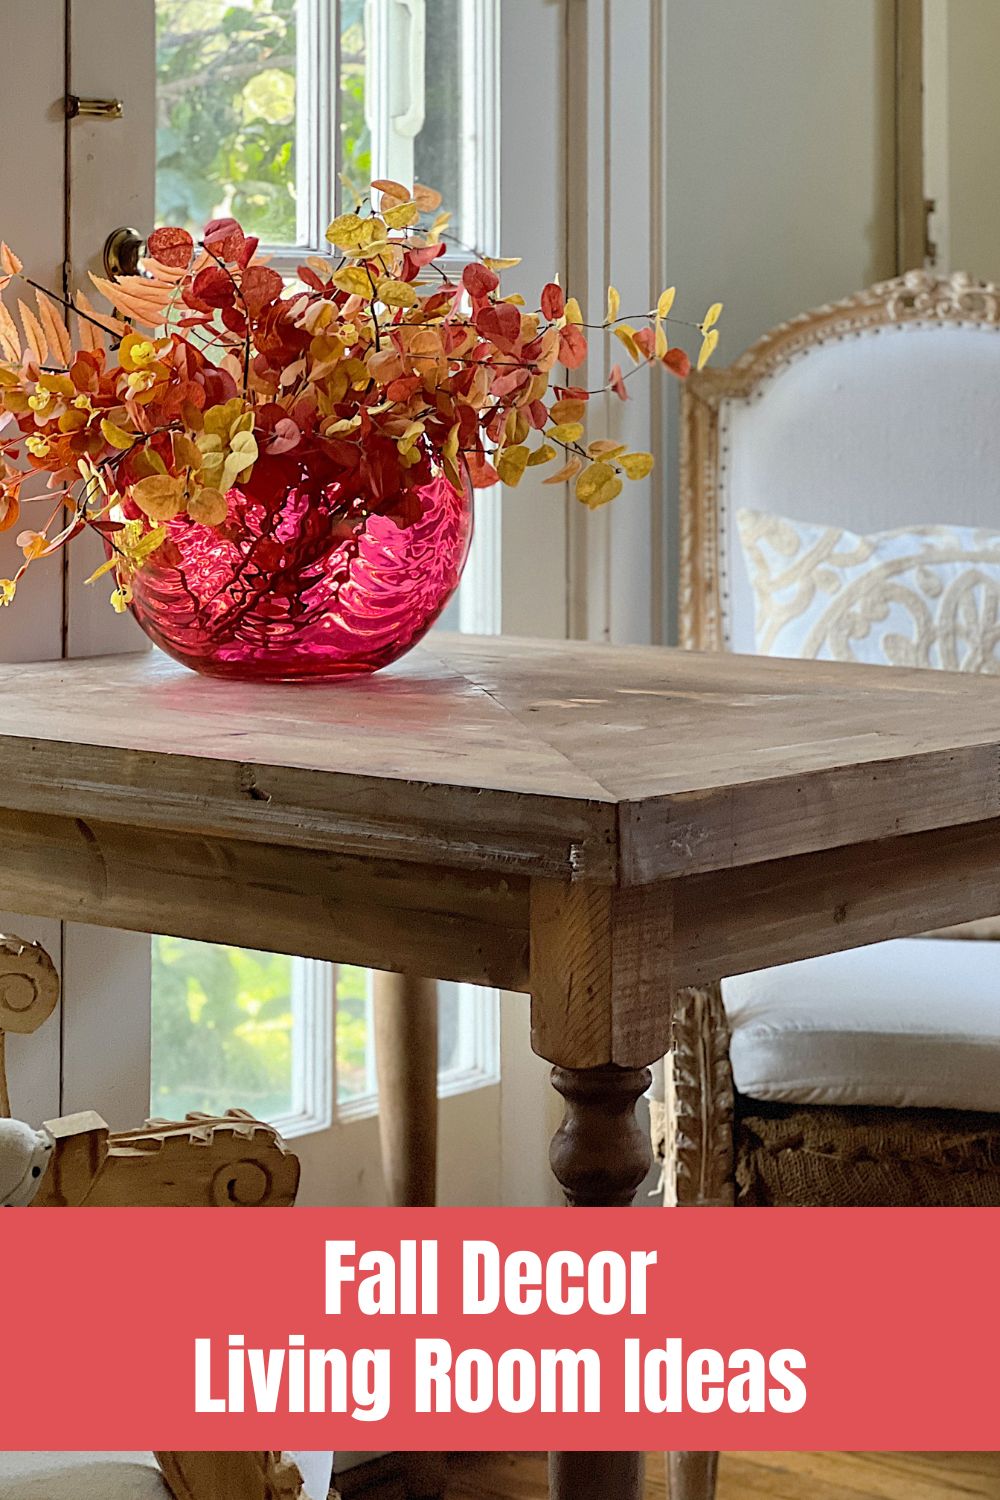 Guess what we did? If you are looking for some decor inspiration, check out these new fall decor living room ideas!